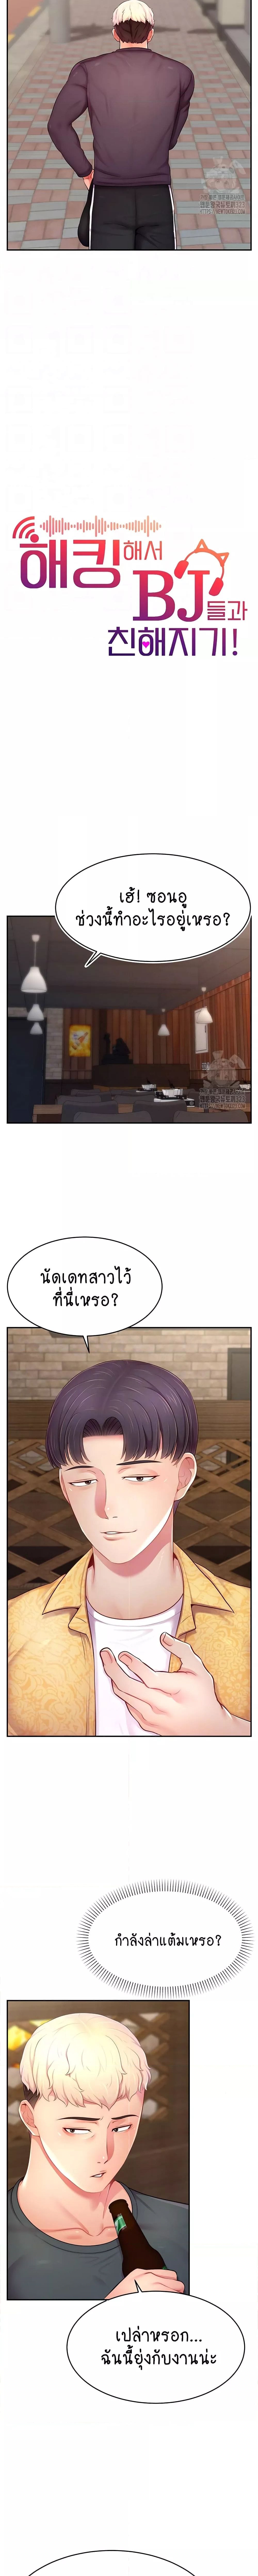 Making Friends With Streamers by Hacking! ตอนที่ 10 ภาพ 1